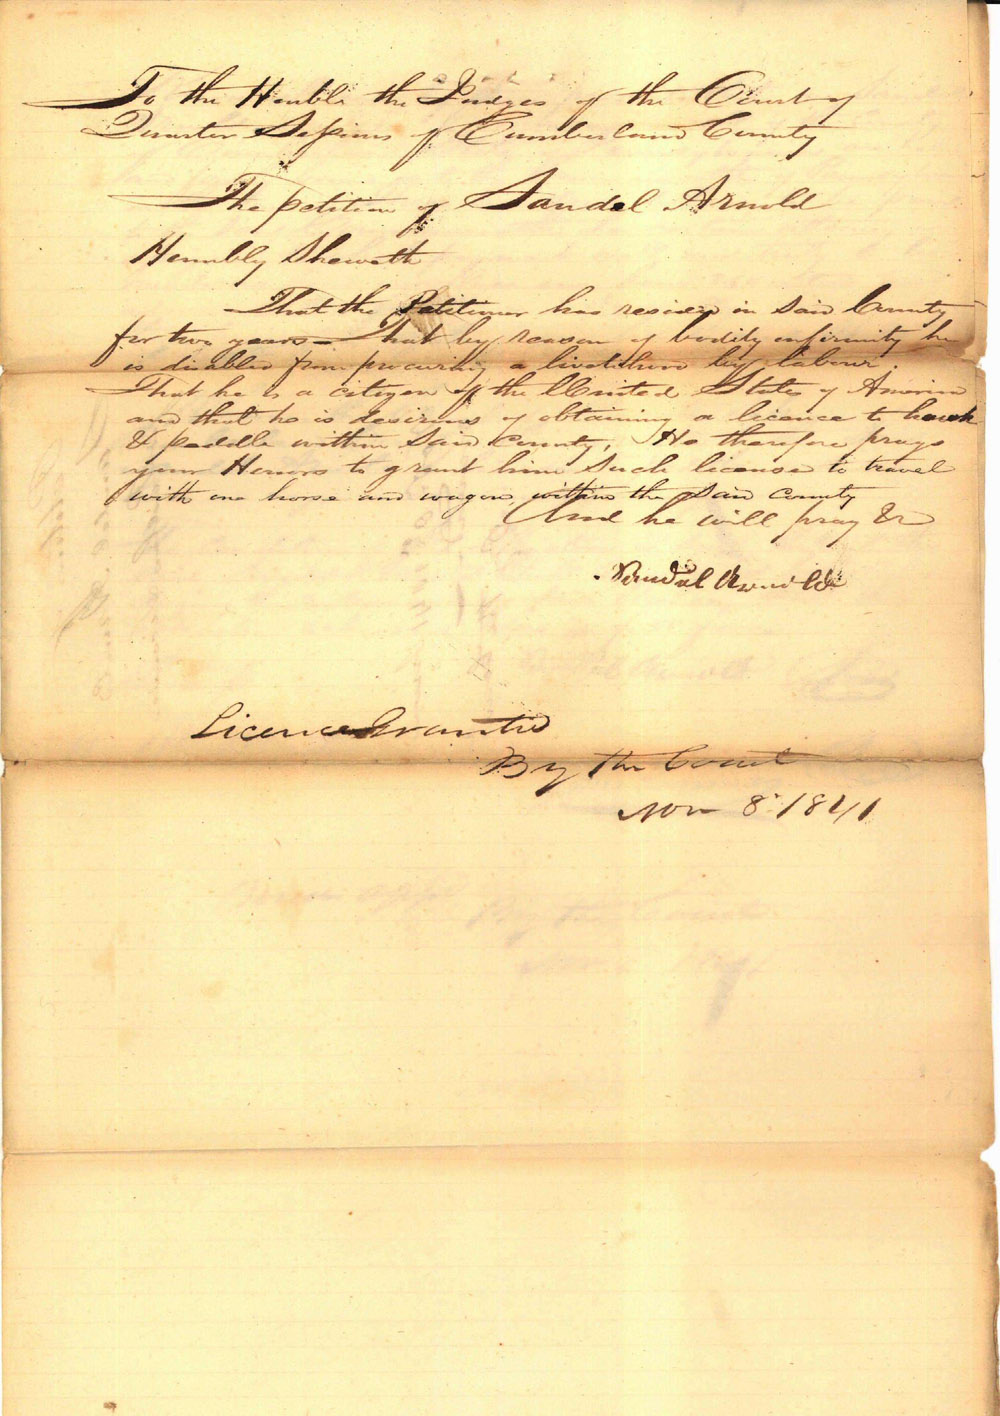 Scan of the third page of the Peddler's license issued to Sandel Arnold